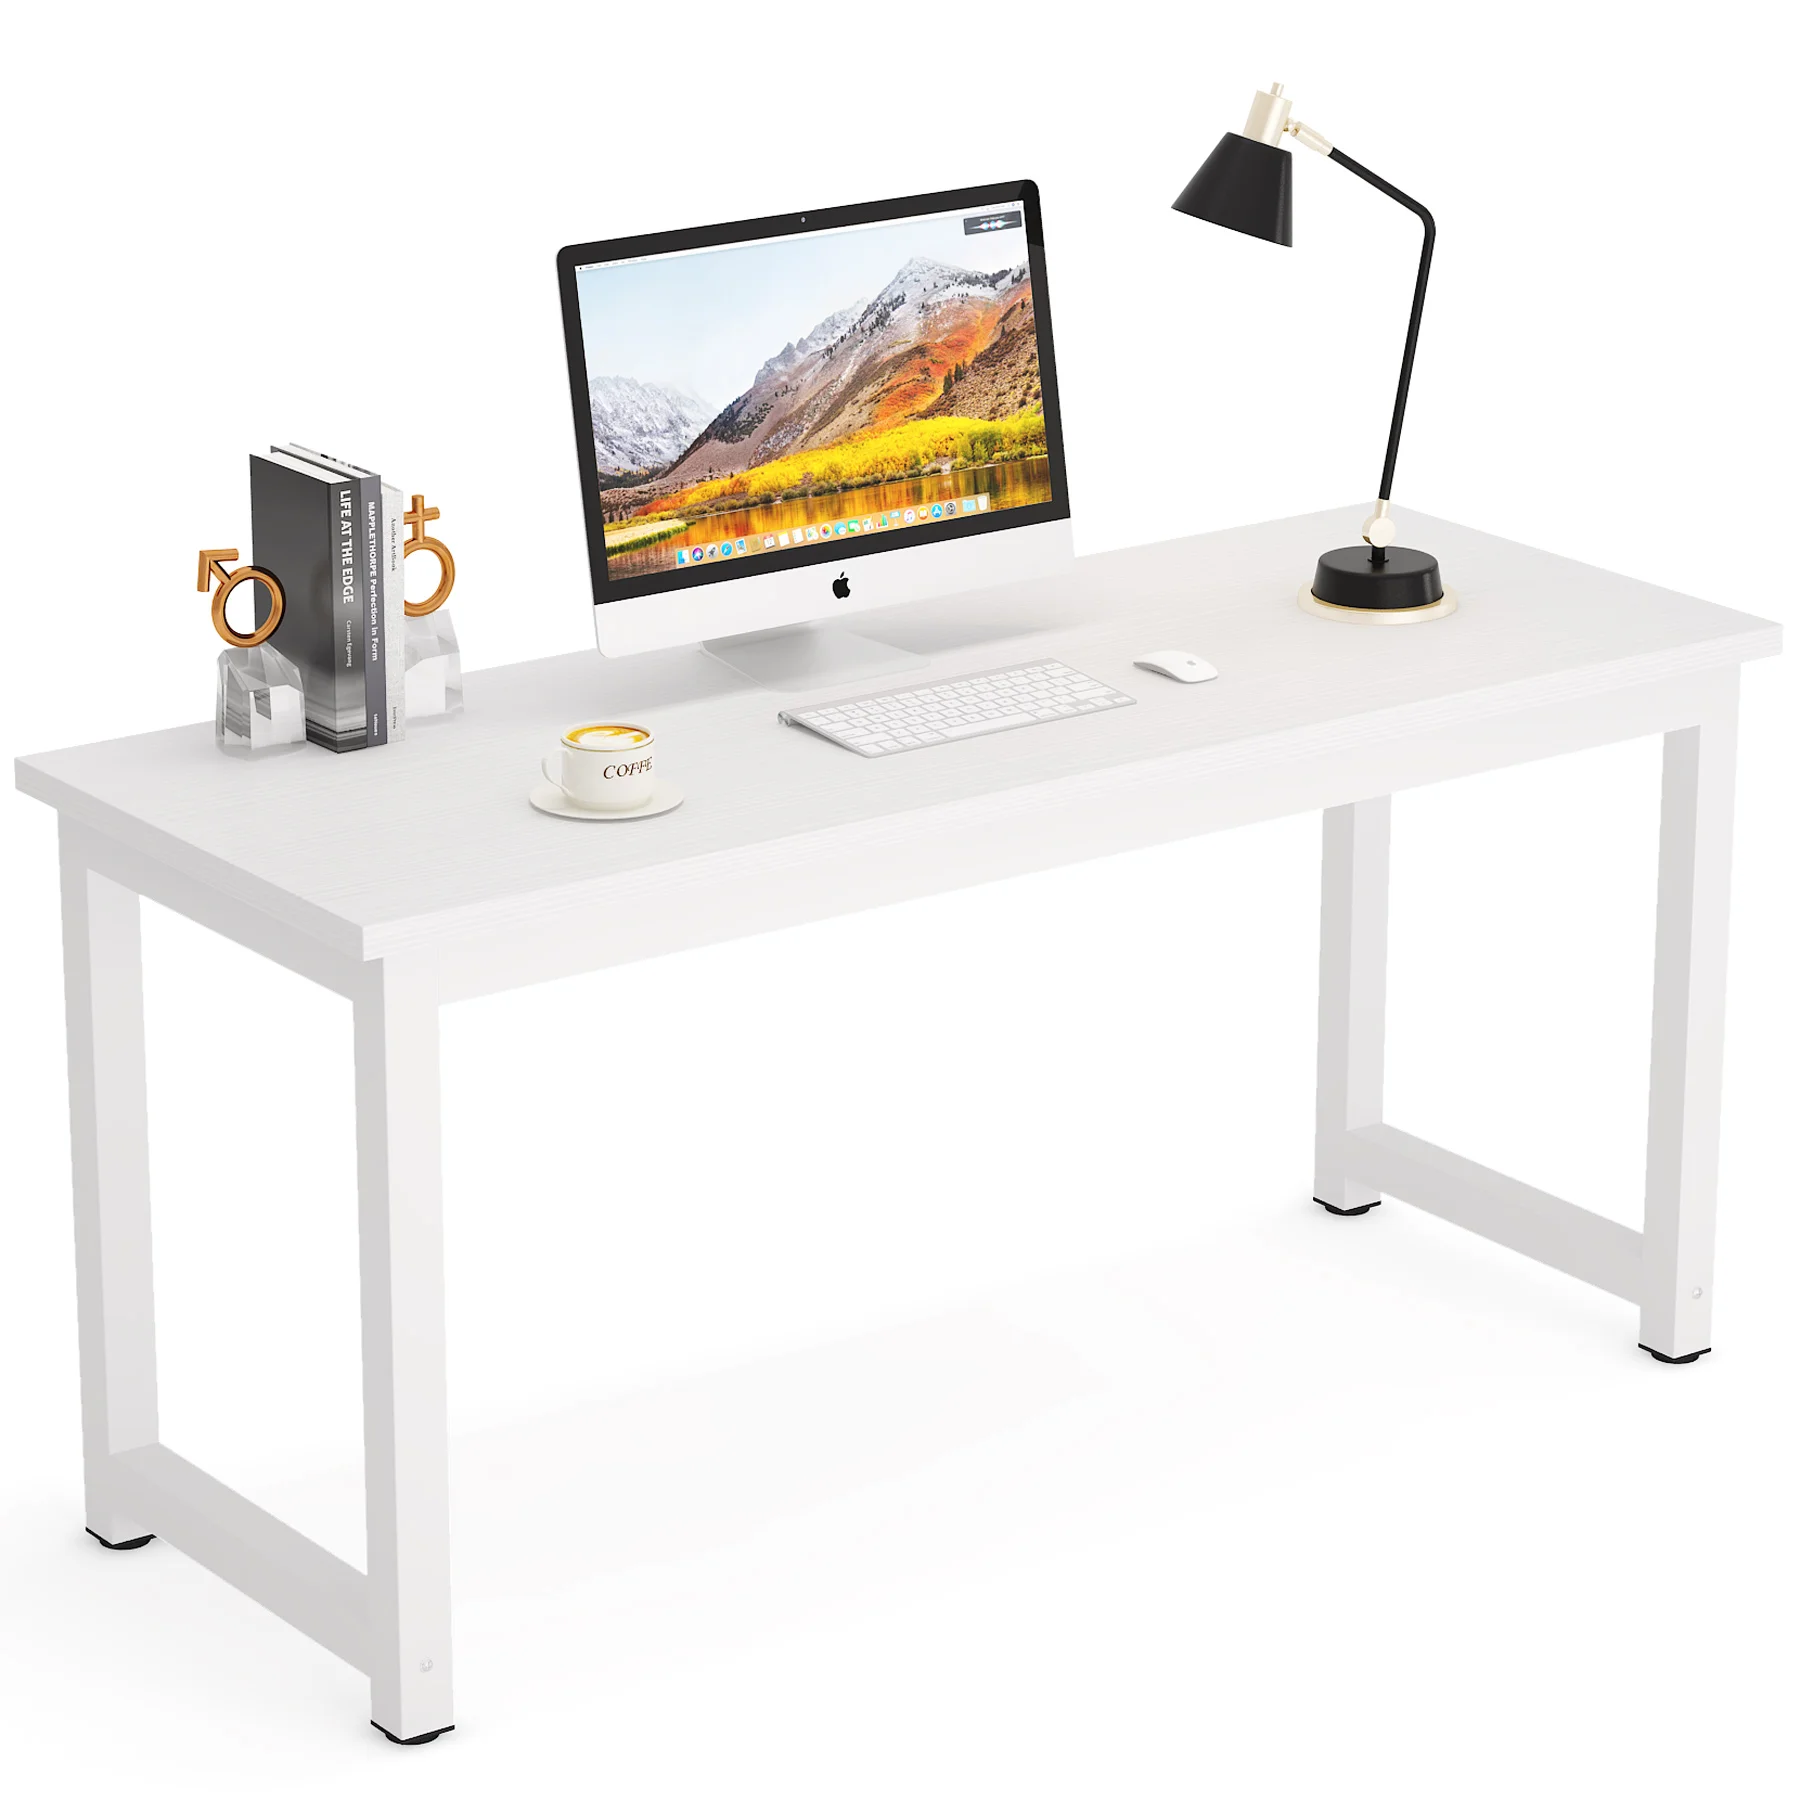 Hot Selling White Simple Writing Desks Office Computer And Study Tables For Sale